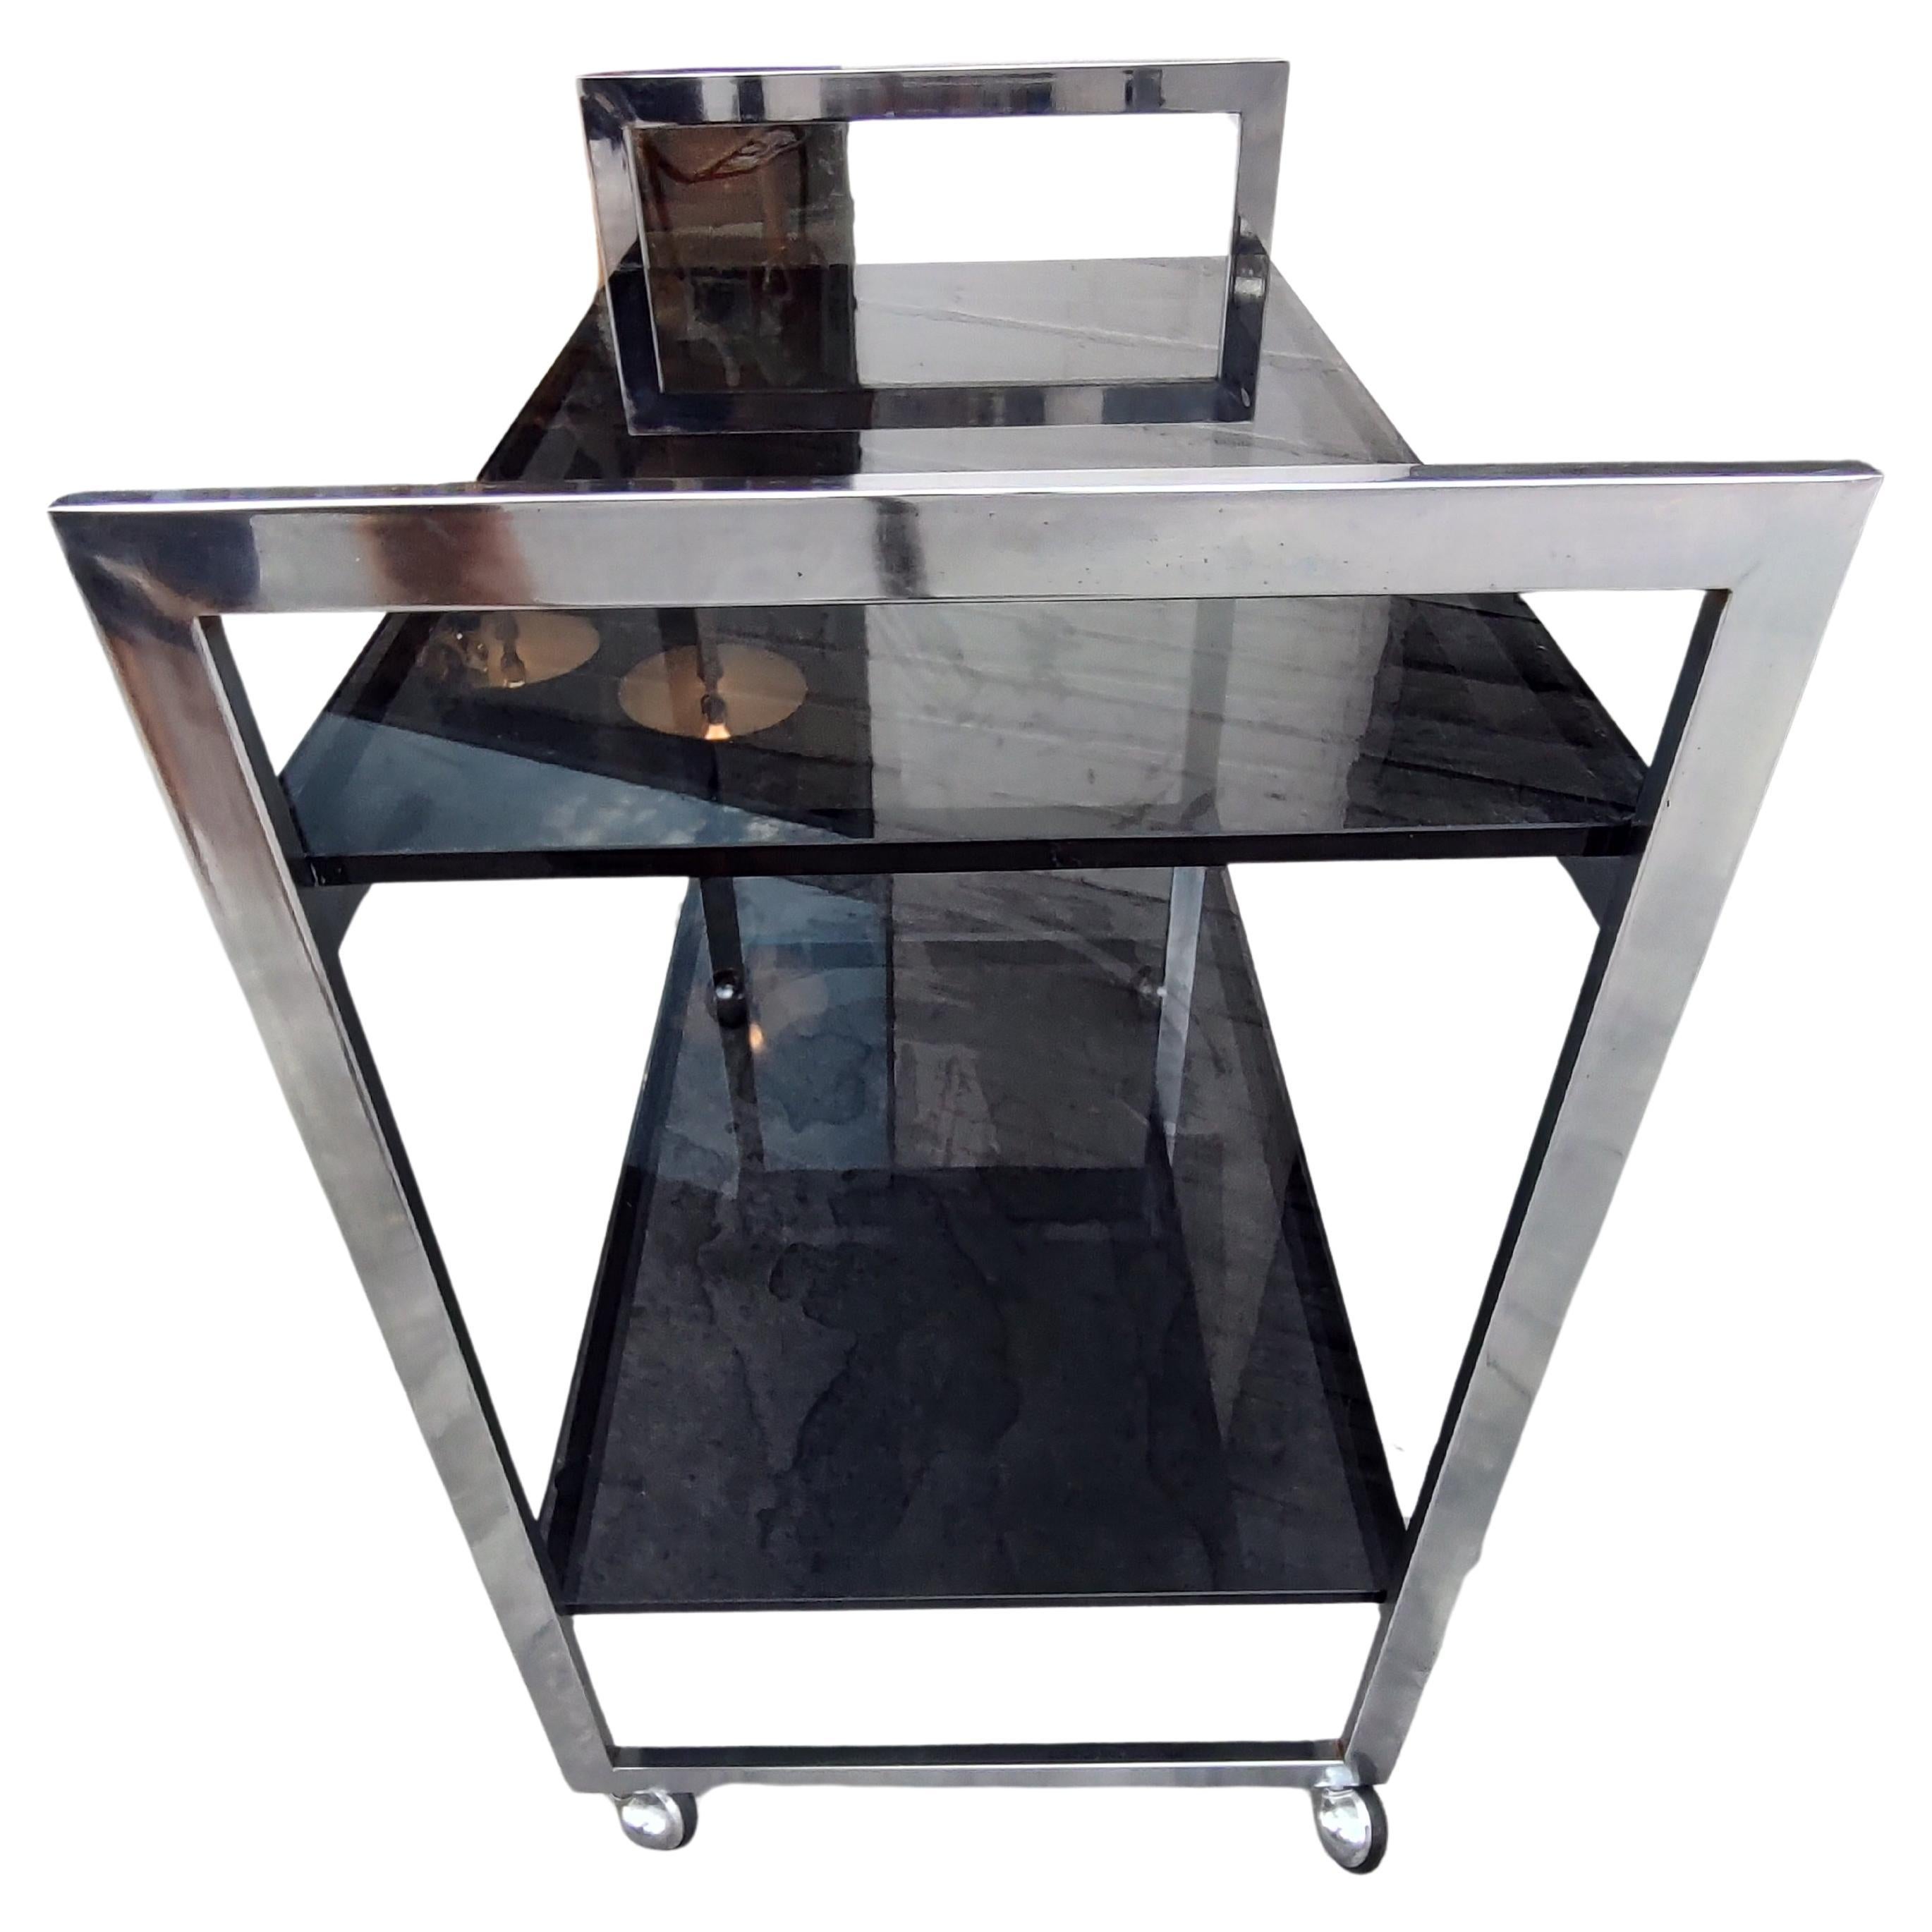 Mid-Century Modern Chrome with Black Glass Bar Cart, C1970 In Good Condition For Sale In Port Jervis, NY